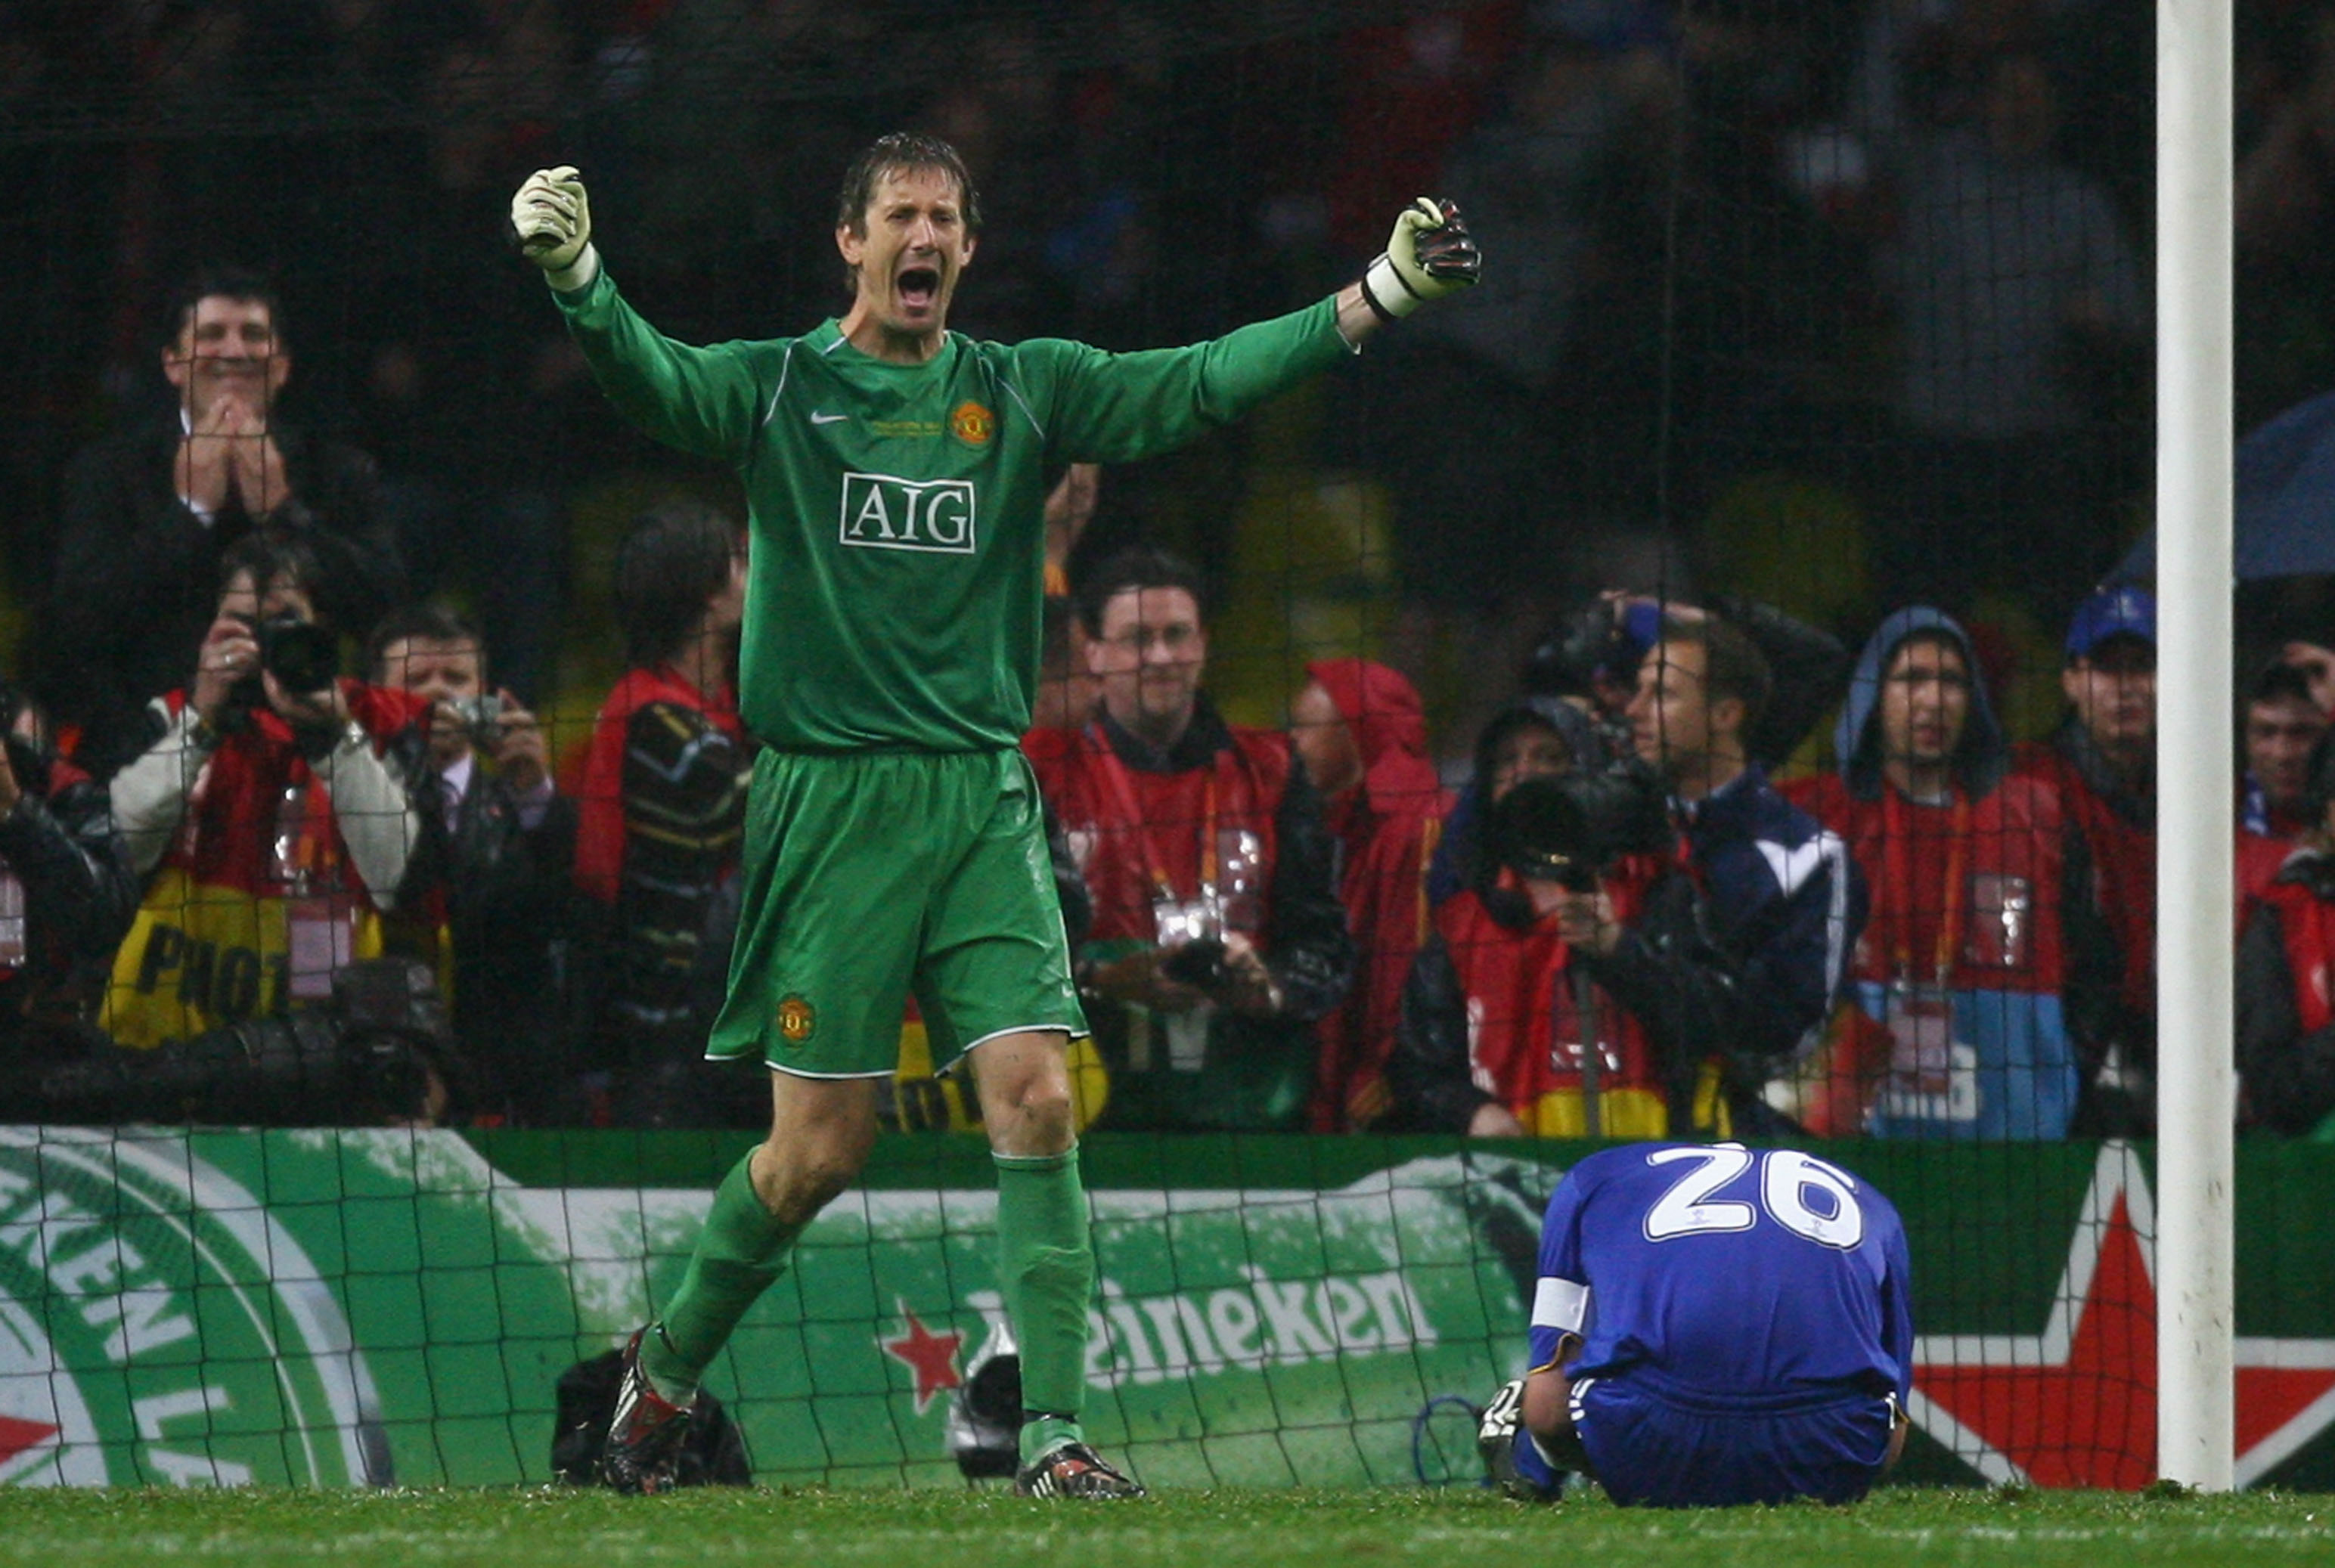 MOSCOW - MAY 21:  Edwin Van der Sar of Manchester United celebrates after John Terry of Chelsea misses a penalty during the UEFA Champions League Final match between Manchester United and Chelsea at the Luzhniki Stadium on May 21, 2008 in Moscow, Russia.